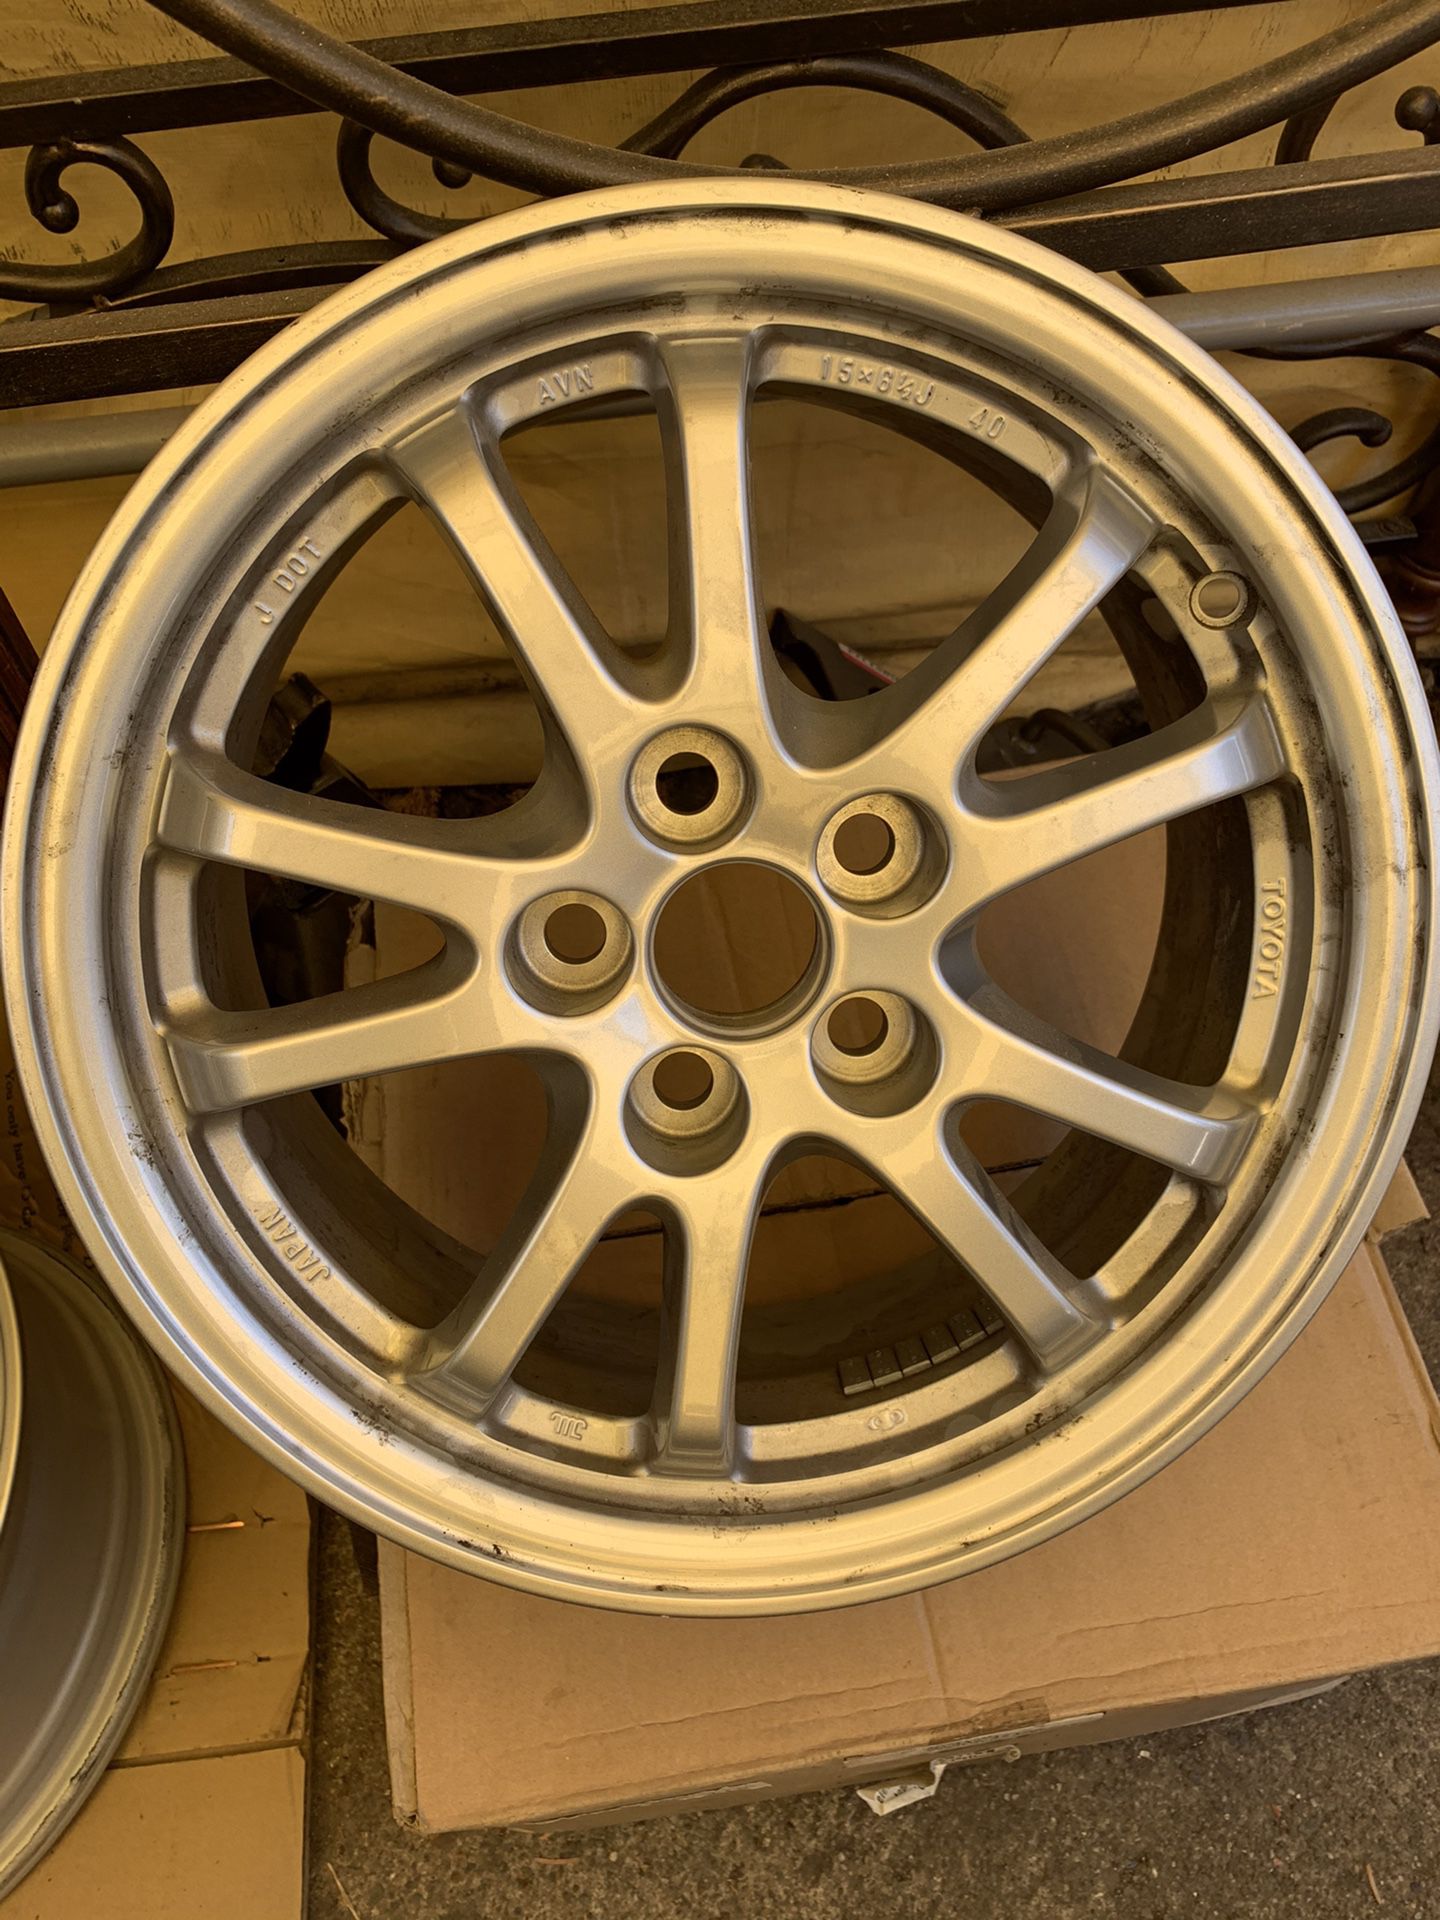 Rims only sizes 15 no scratch or damage clean Toyota Prius and Toyota Corolla fit any car